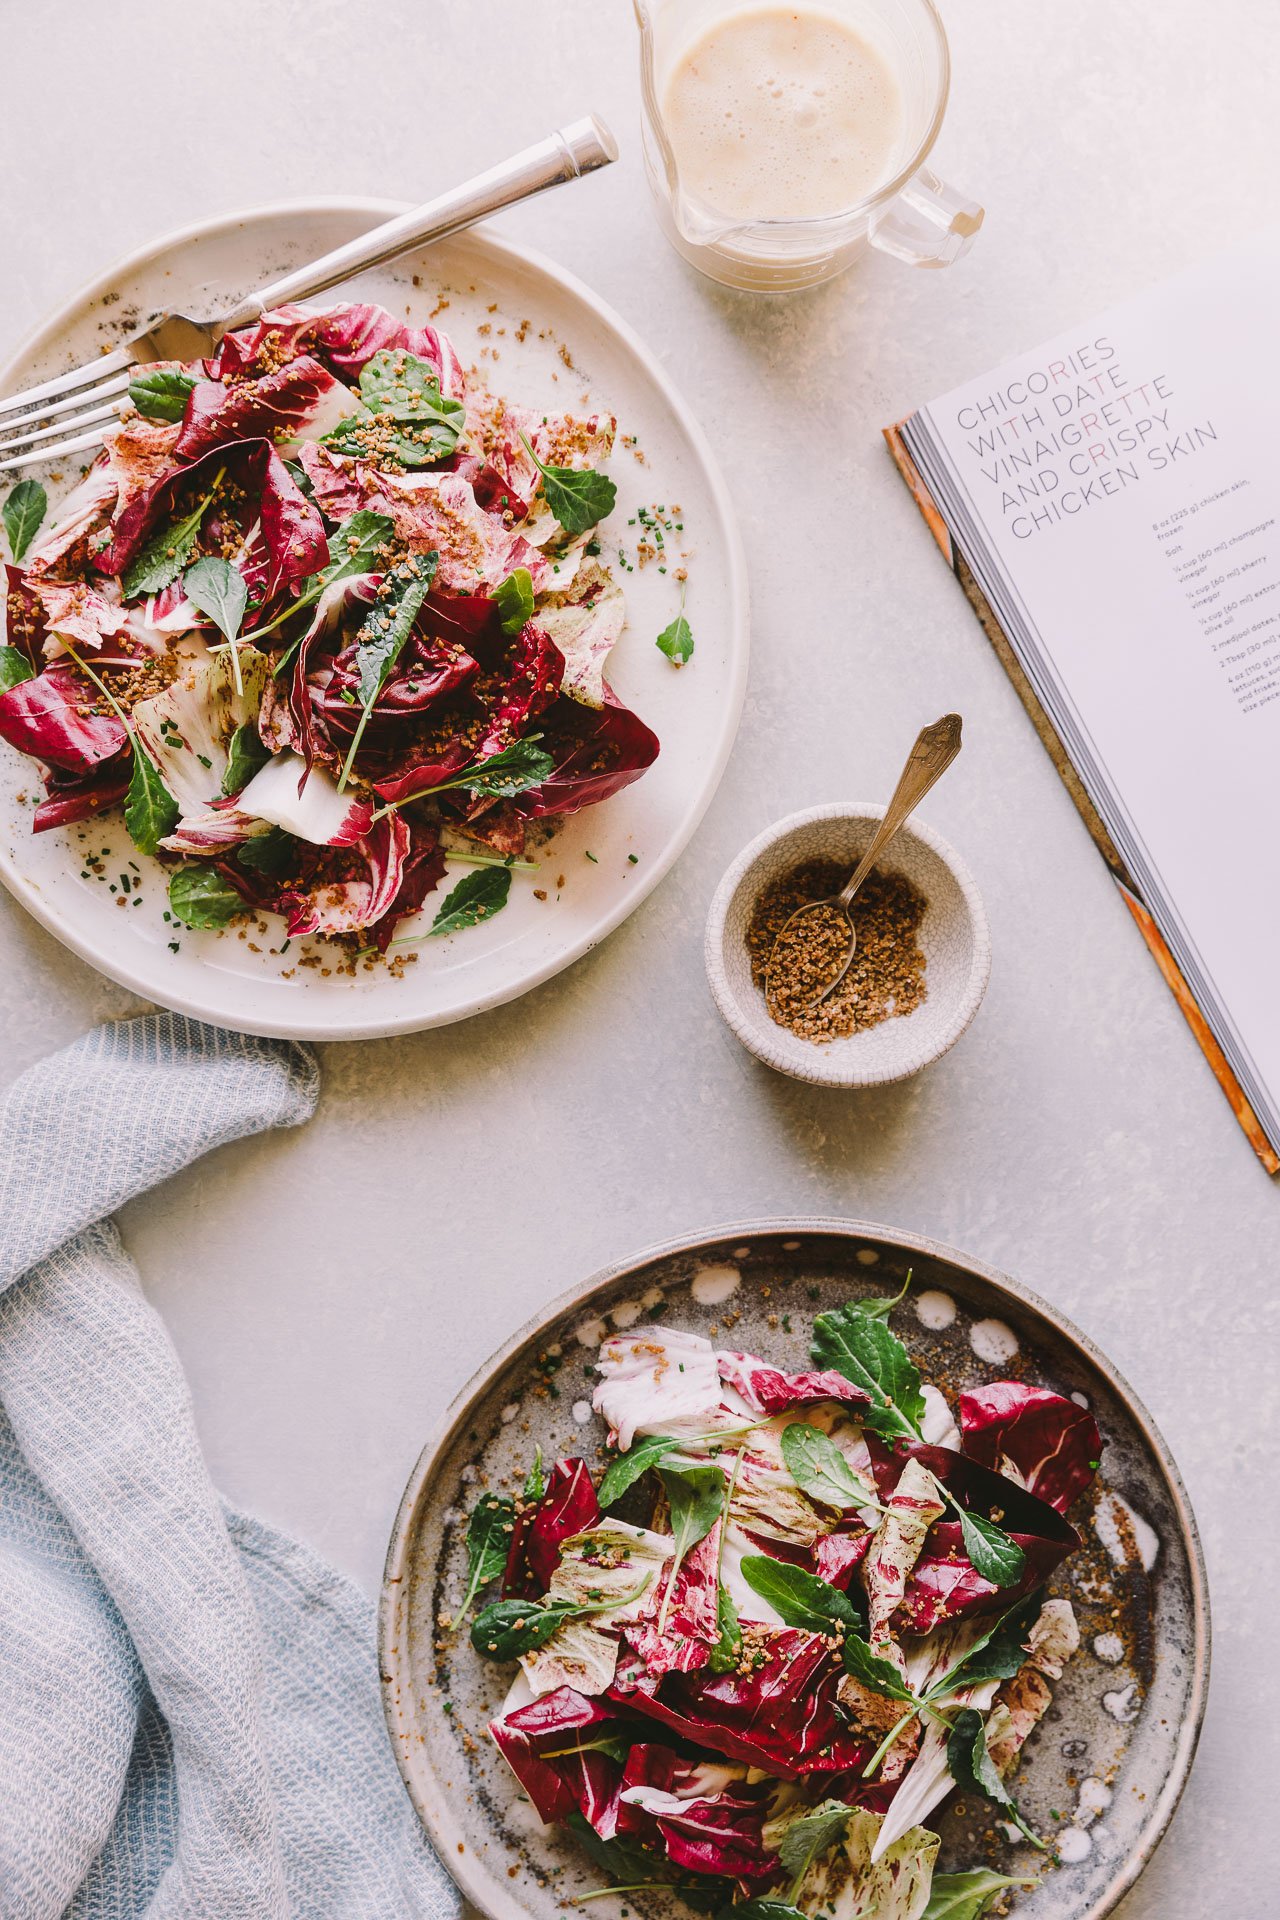 Chicories w/ Date Vinaigrette and Crispy Chicken Skin | Recipe from the Rich Table cookbook | Photography by HonestlyYUM